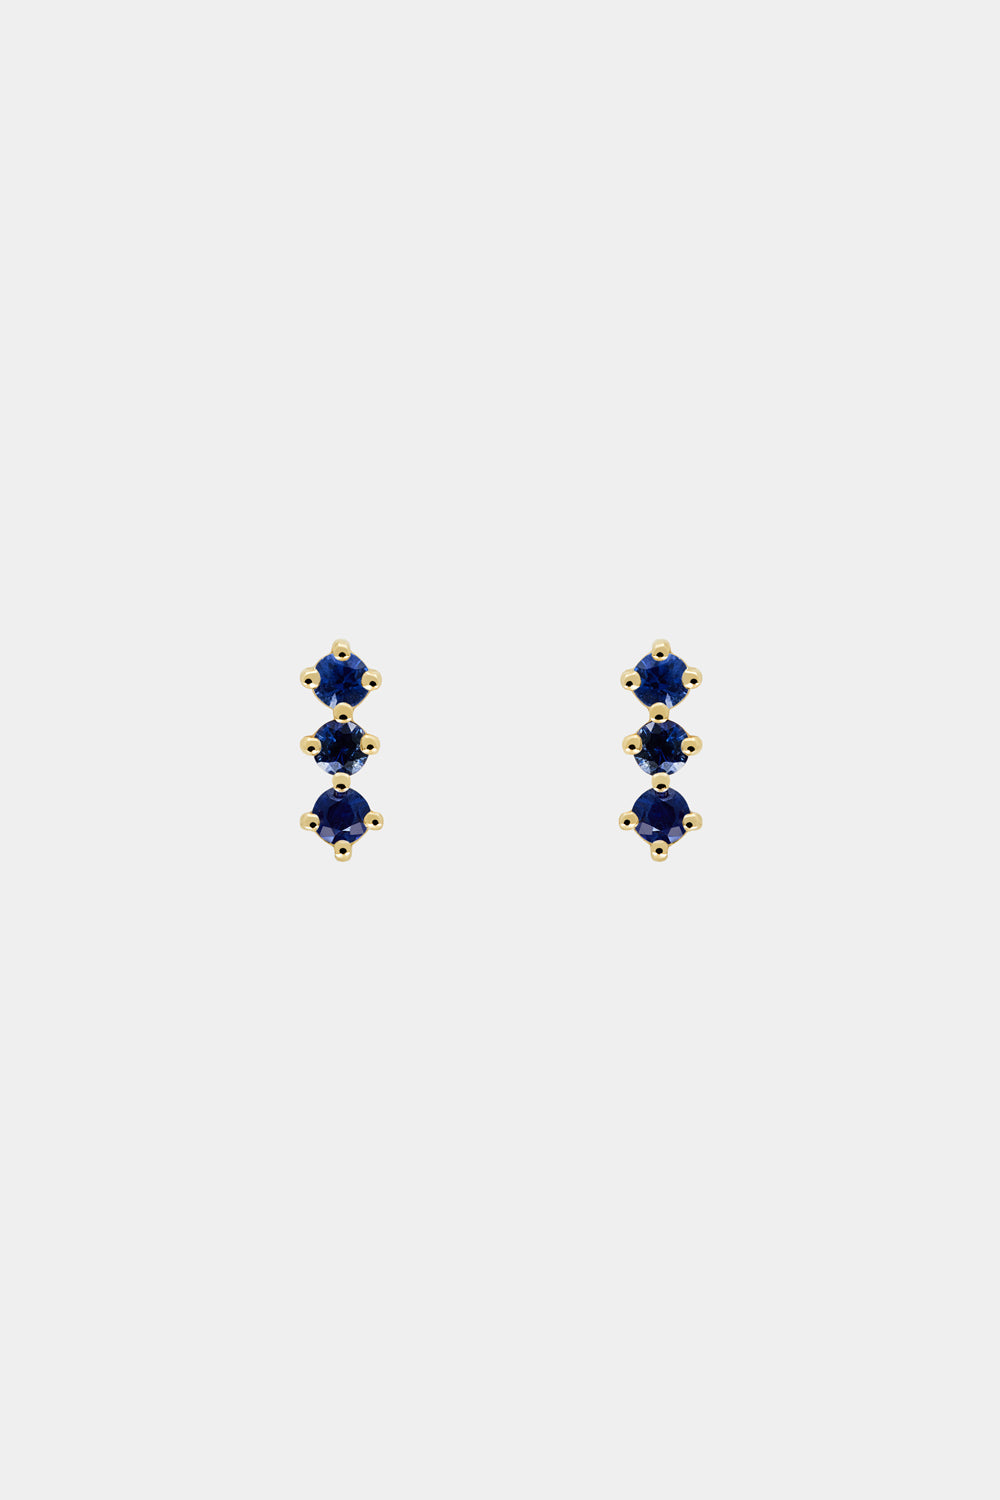 Buttercup Sapphire Bar Earrings | Yellow Gold, More Options Available| Natasha Schweitzer